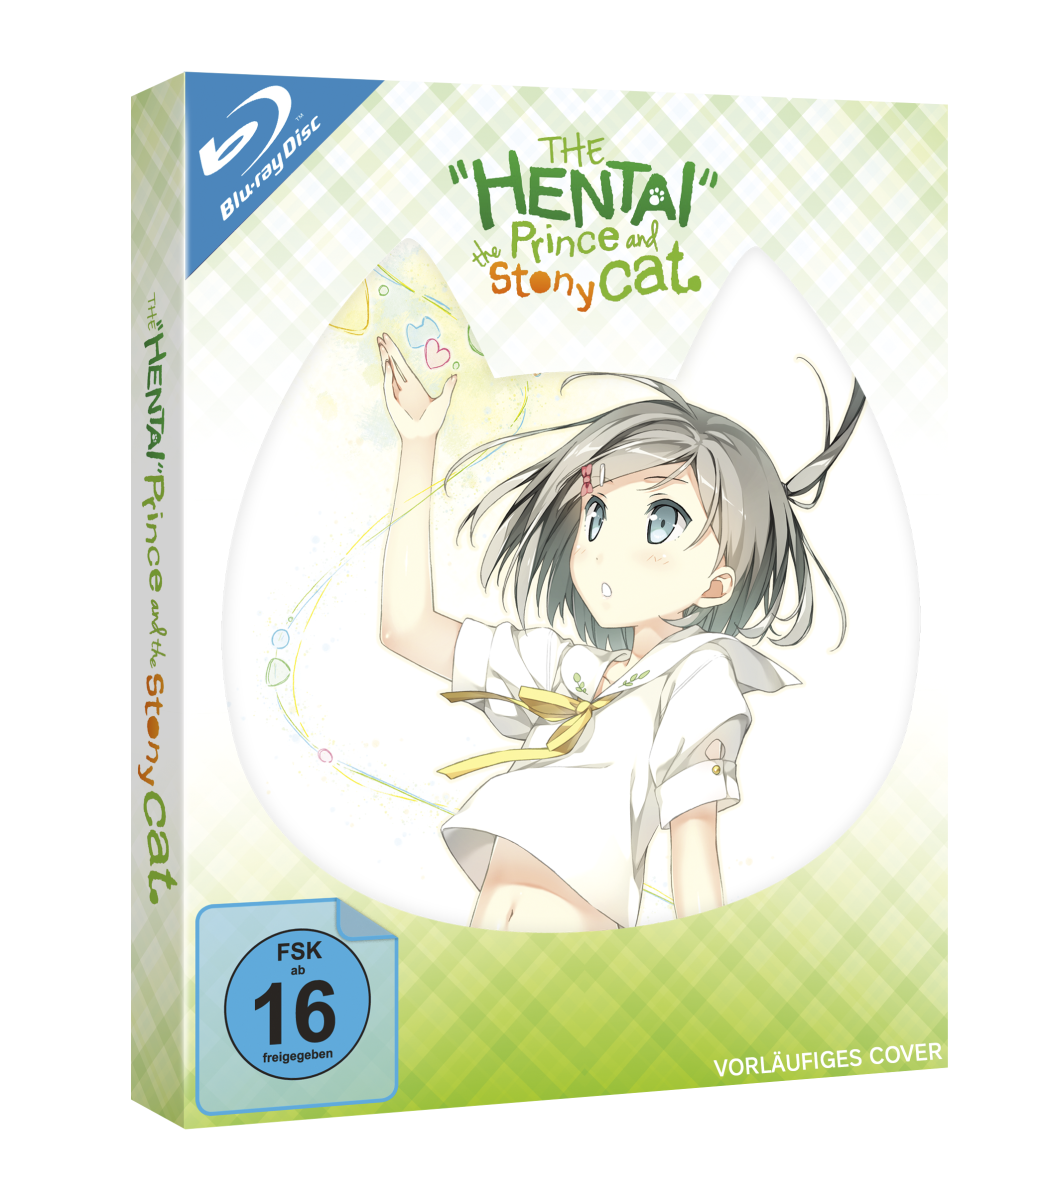 The Hentai Prince and the Stony Cat - Volume 1: Episode 1-6 [Blu-ray] Image 2